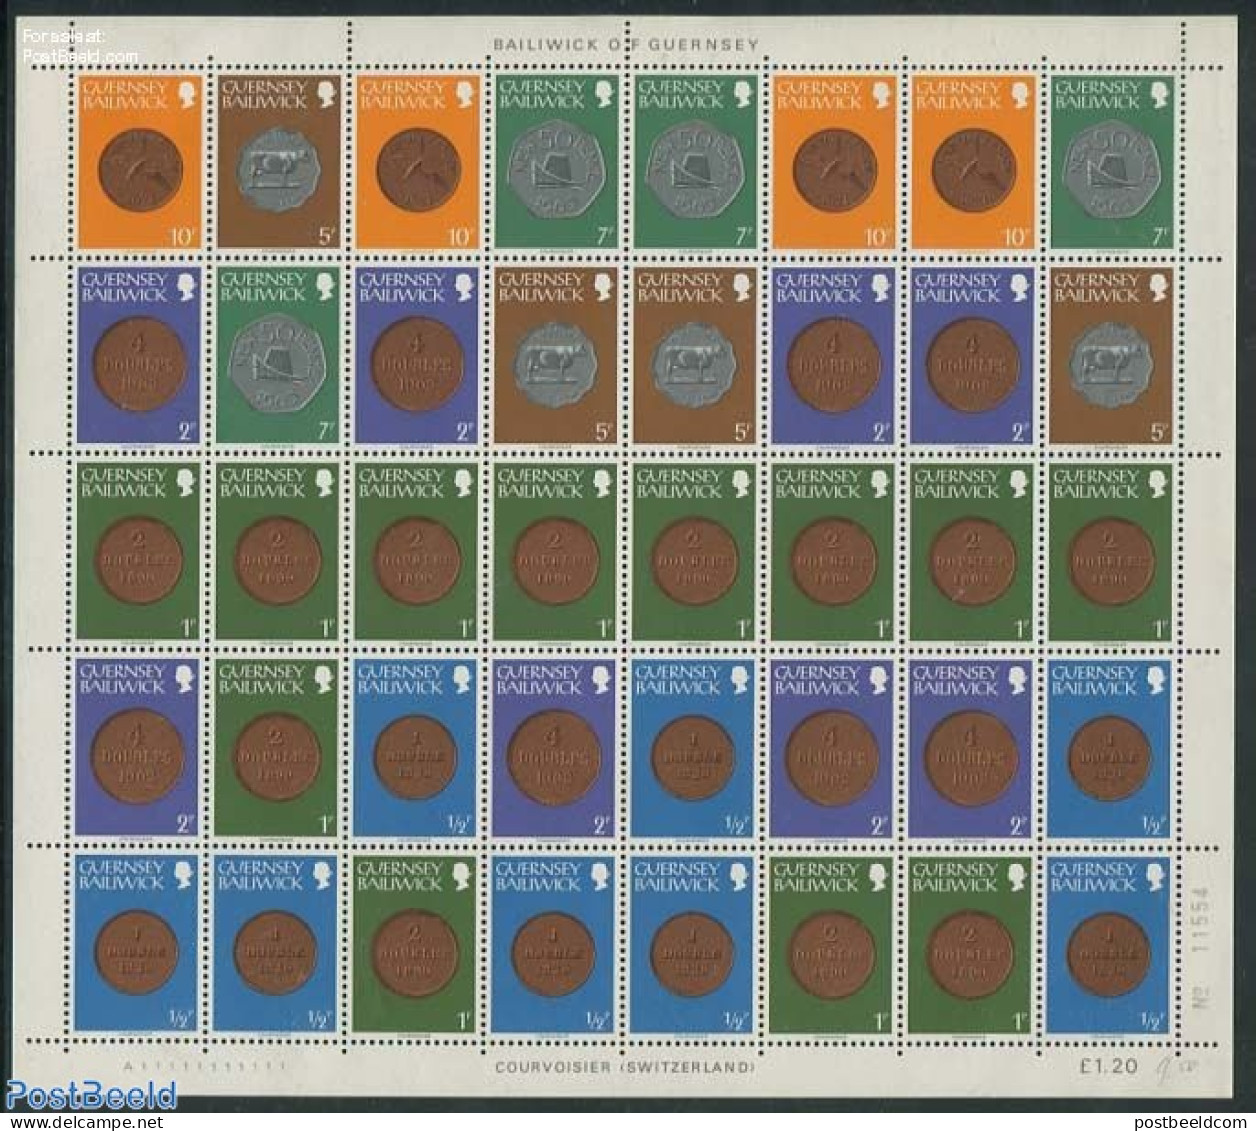 Guernsey 1980 Coins Booklet Sheet, Mint NH, Various - Money On Stamps - Monnaies